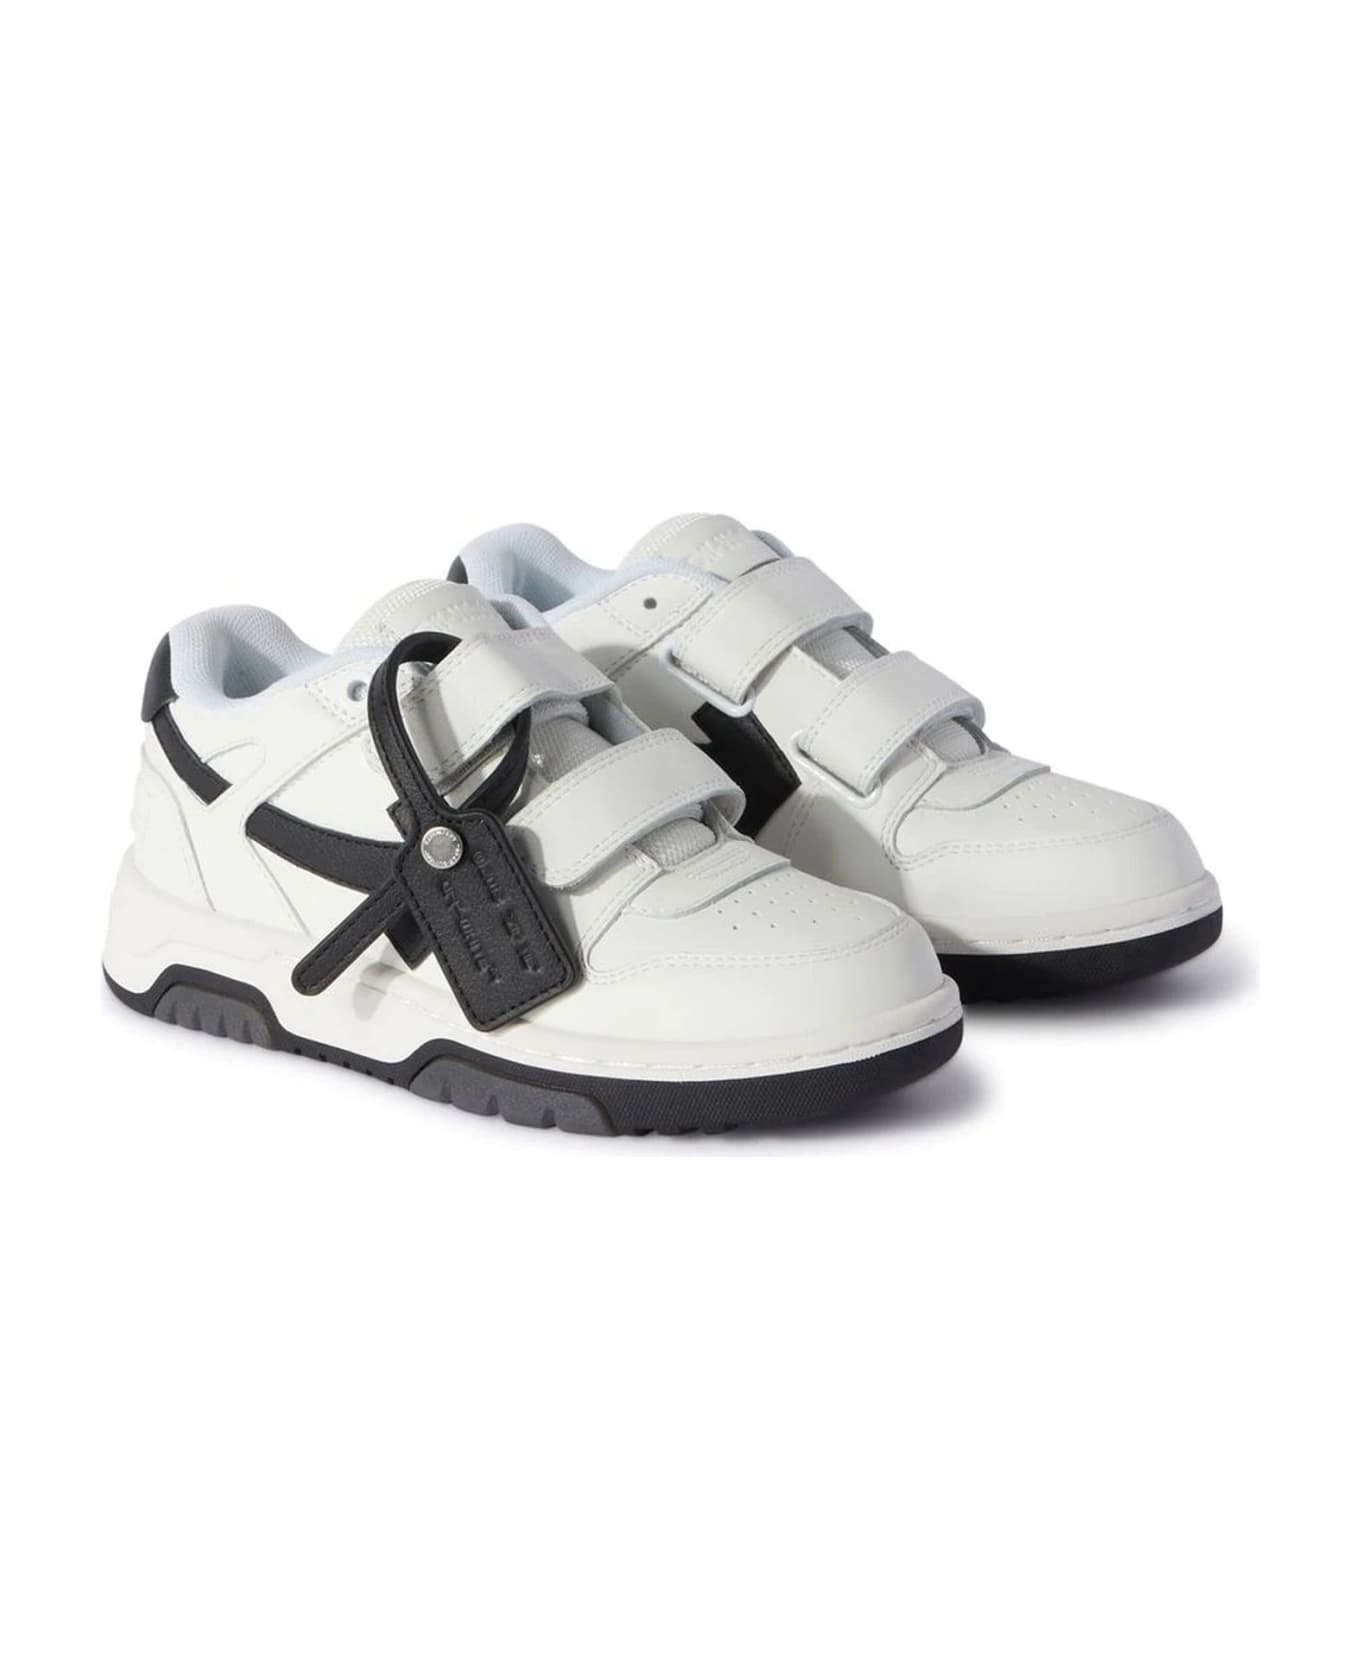 Off-White White Leather Sneakers - Bianco シューズ